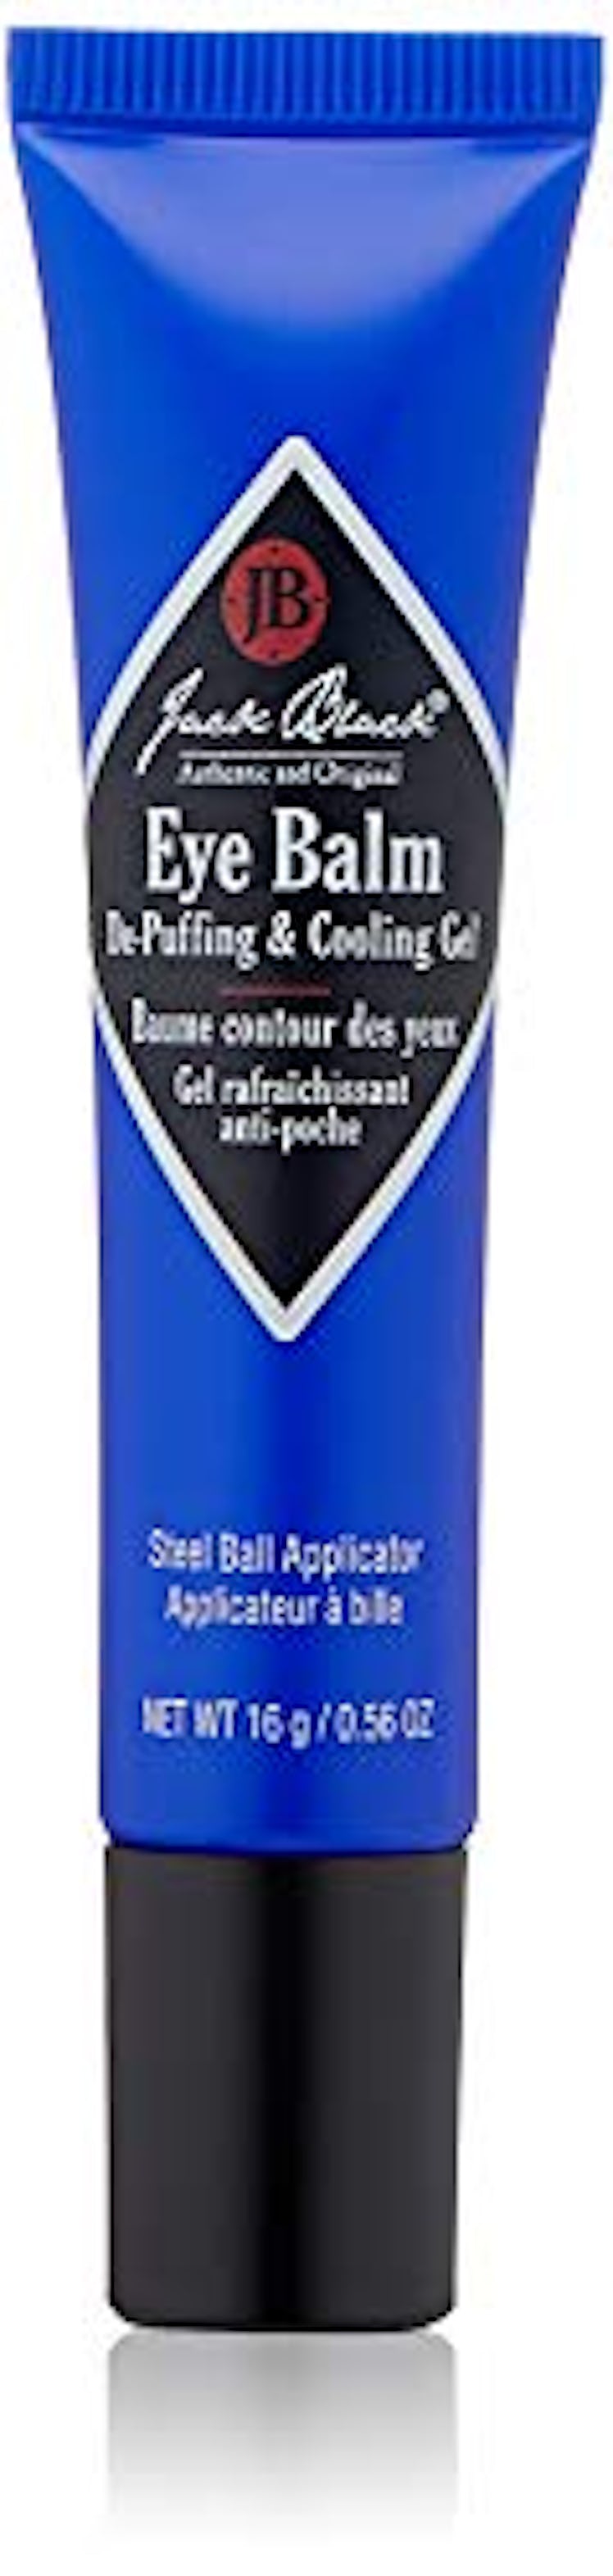 De-Puffing and Cooling Eye Gel by Jack Black